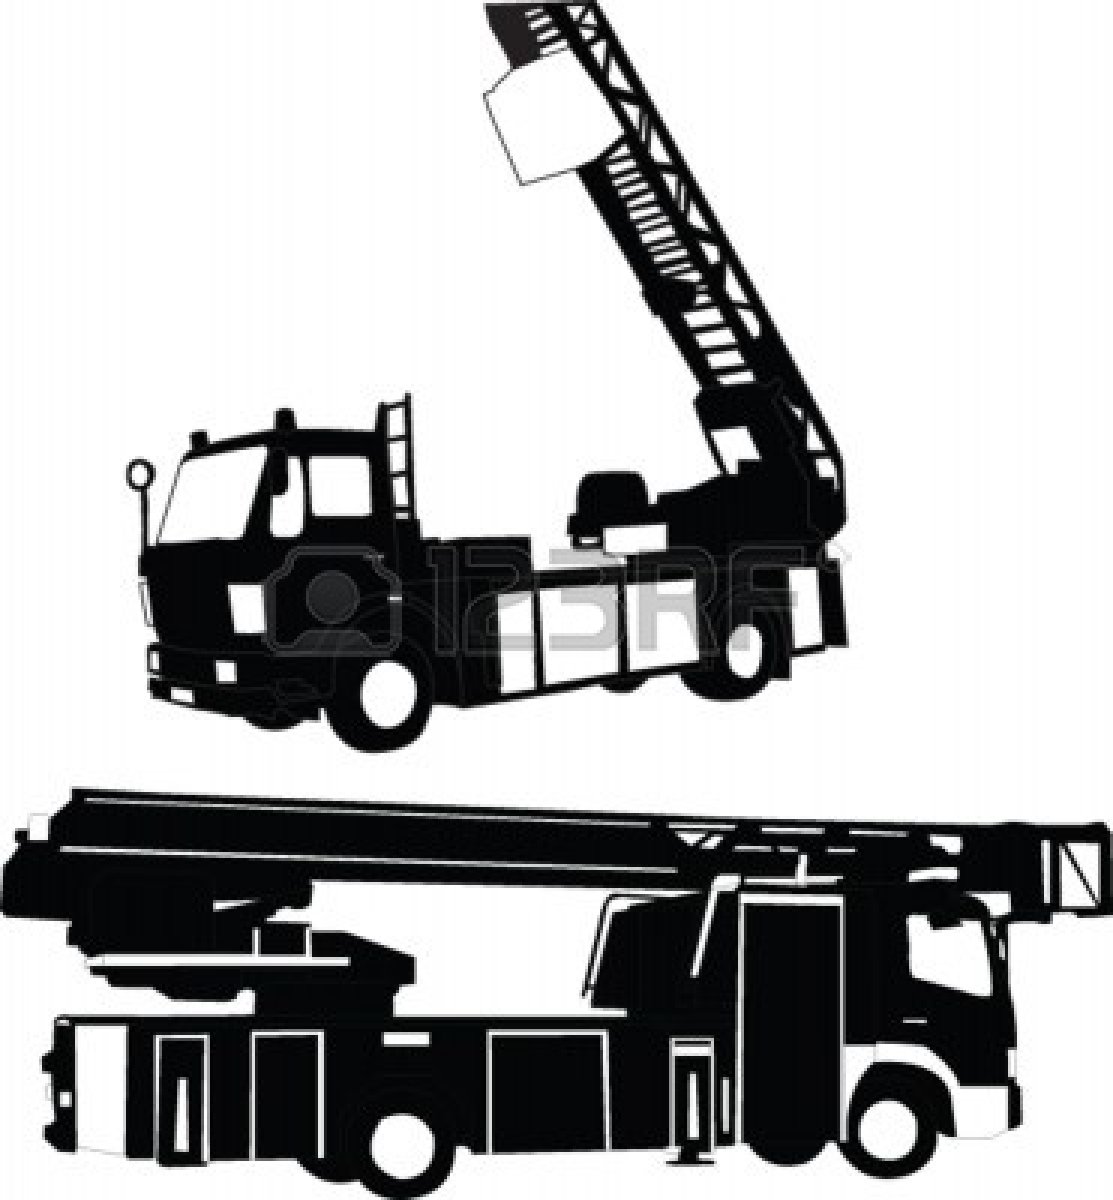 Back   Gallery For Simplified Firefighter Truck Clip Art